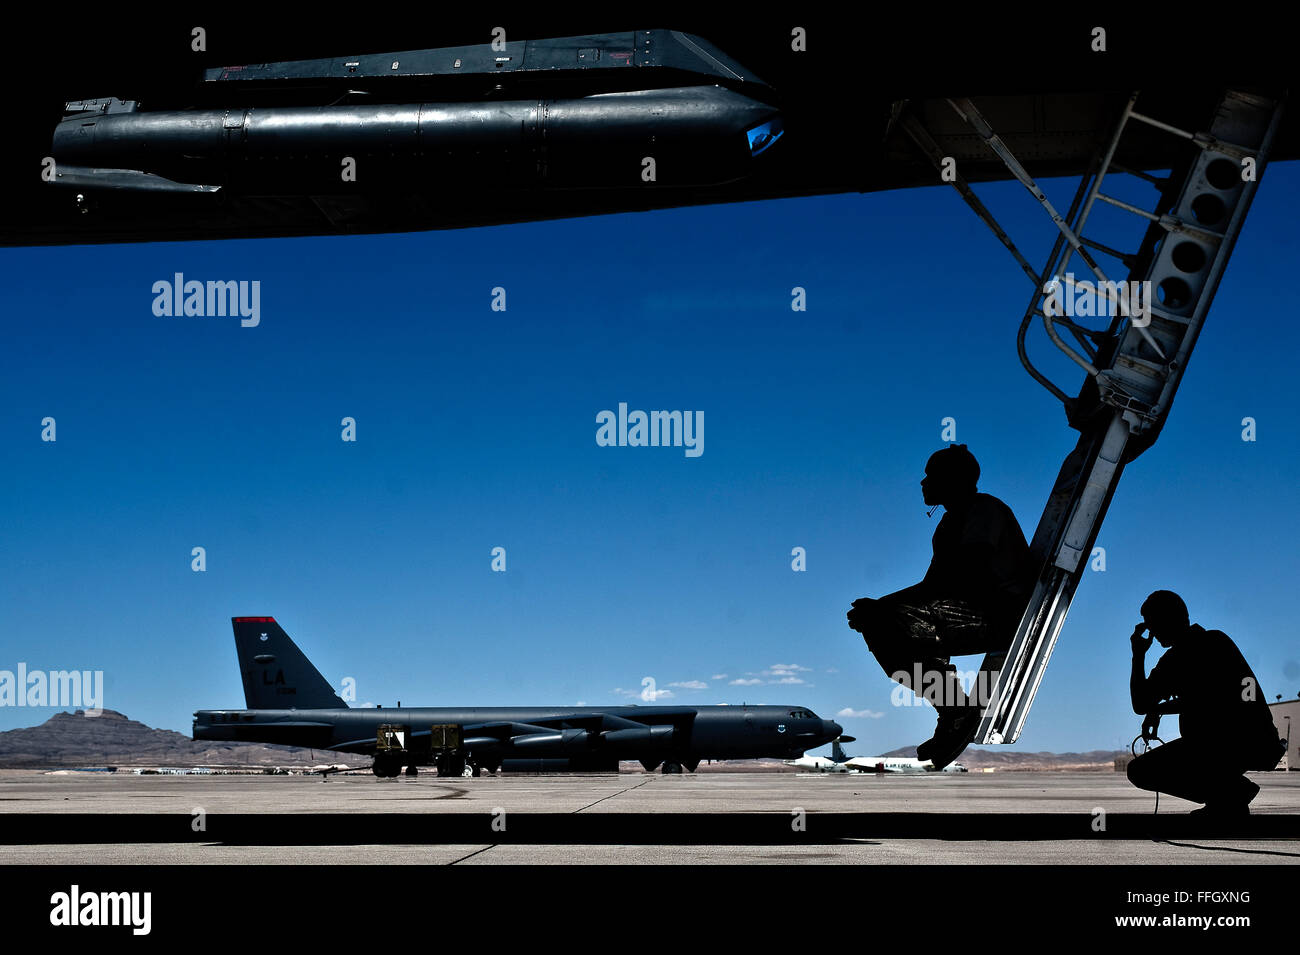 Air Force maintainers wait for a B-1B Lancer to launch during Red Flag 12-4 at Nellis AFB. The B-1B carries the largest payload of both guided and unguided weapons in the U.S. Air Force's inventory. The Airmen are assigned to the 28th Maintenance Squadron at Ellsworth AFB, S.D. Stock Photo